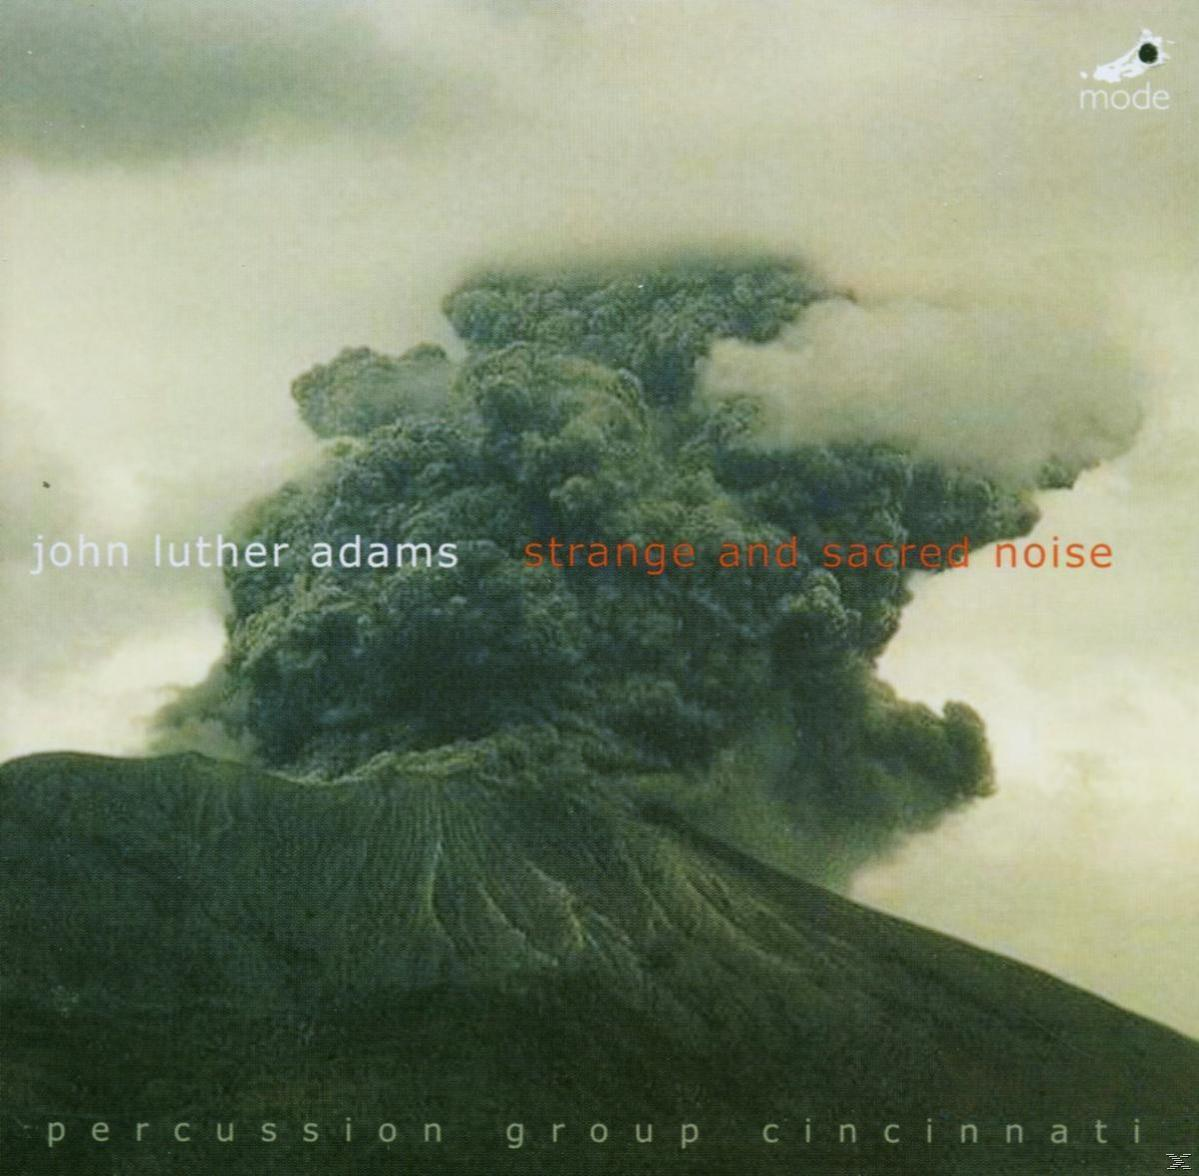 John Luther And Adams Noise - - Strange (DVD) Sacred